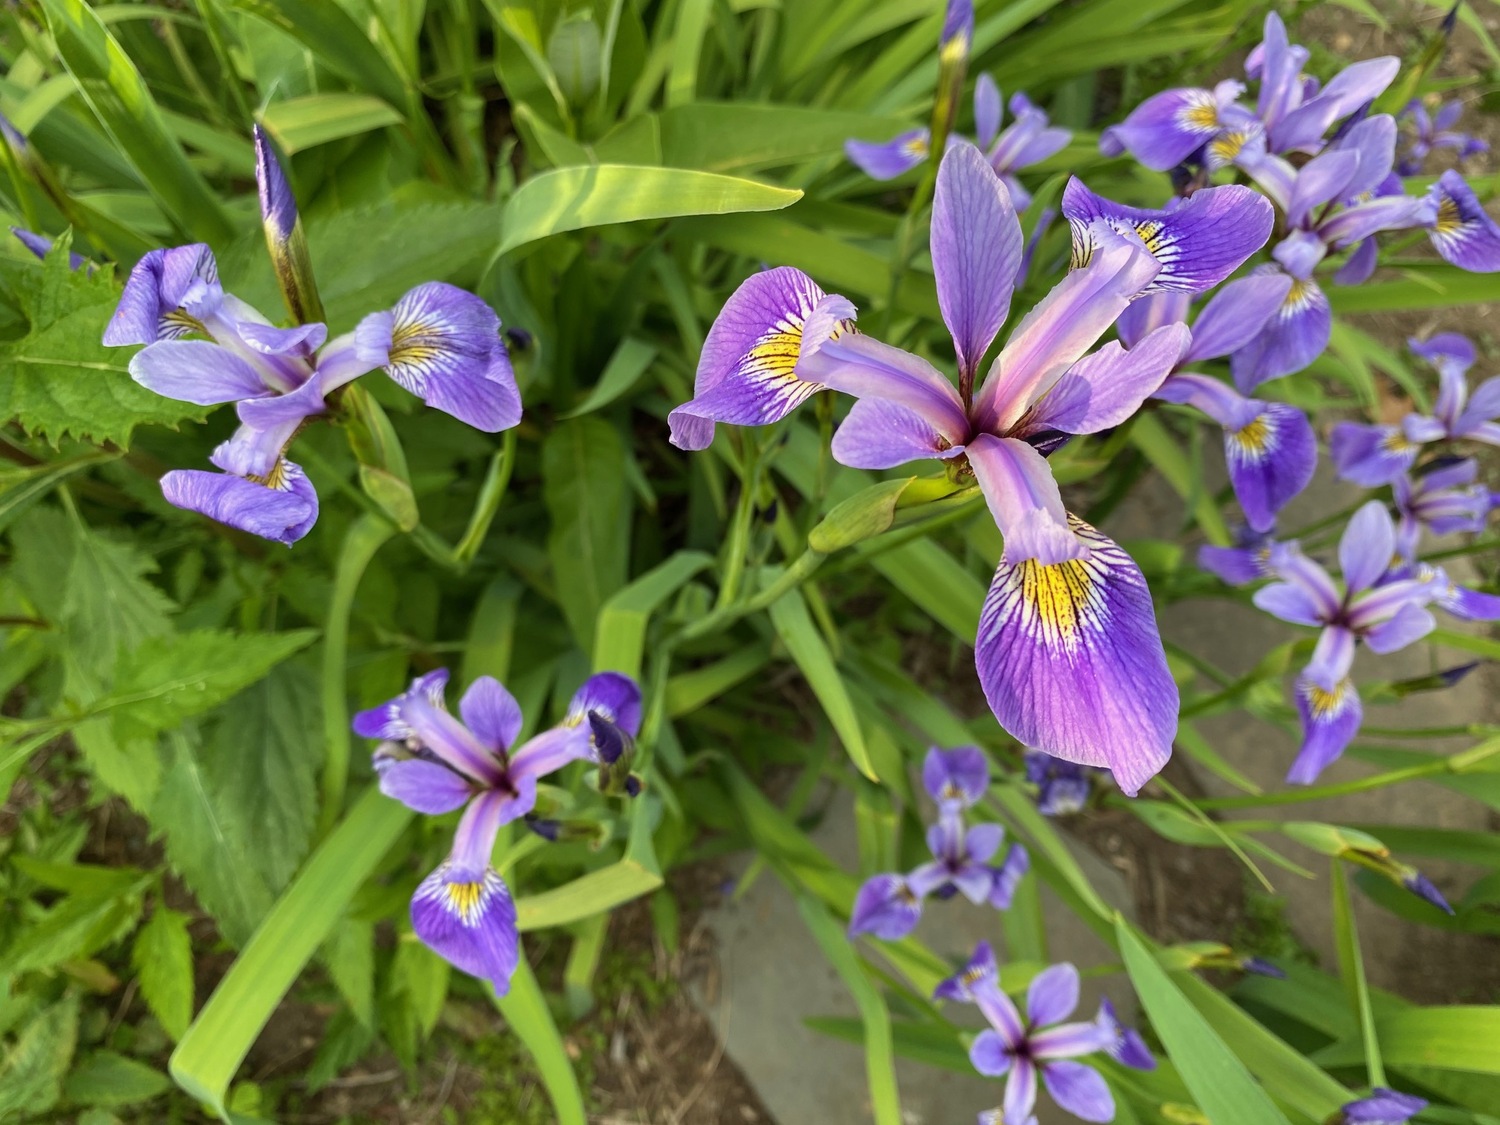 The blue flag iris is not only stunning for the garden but helps maintain native wildlife to help the ecosystem.